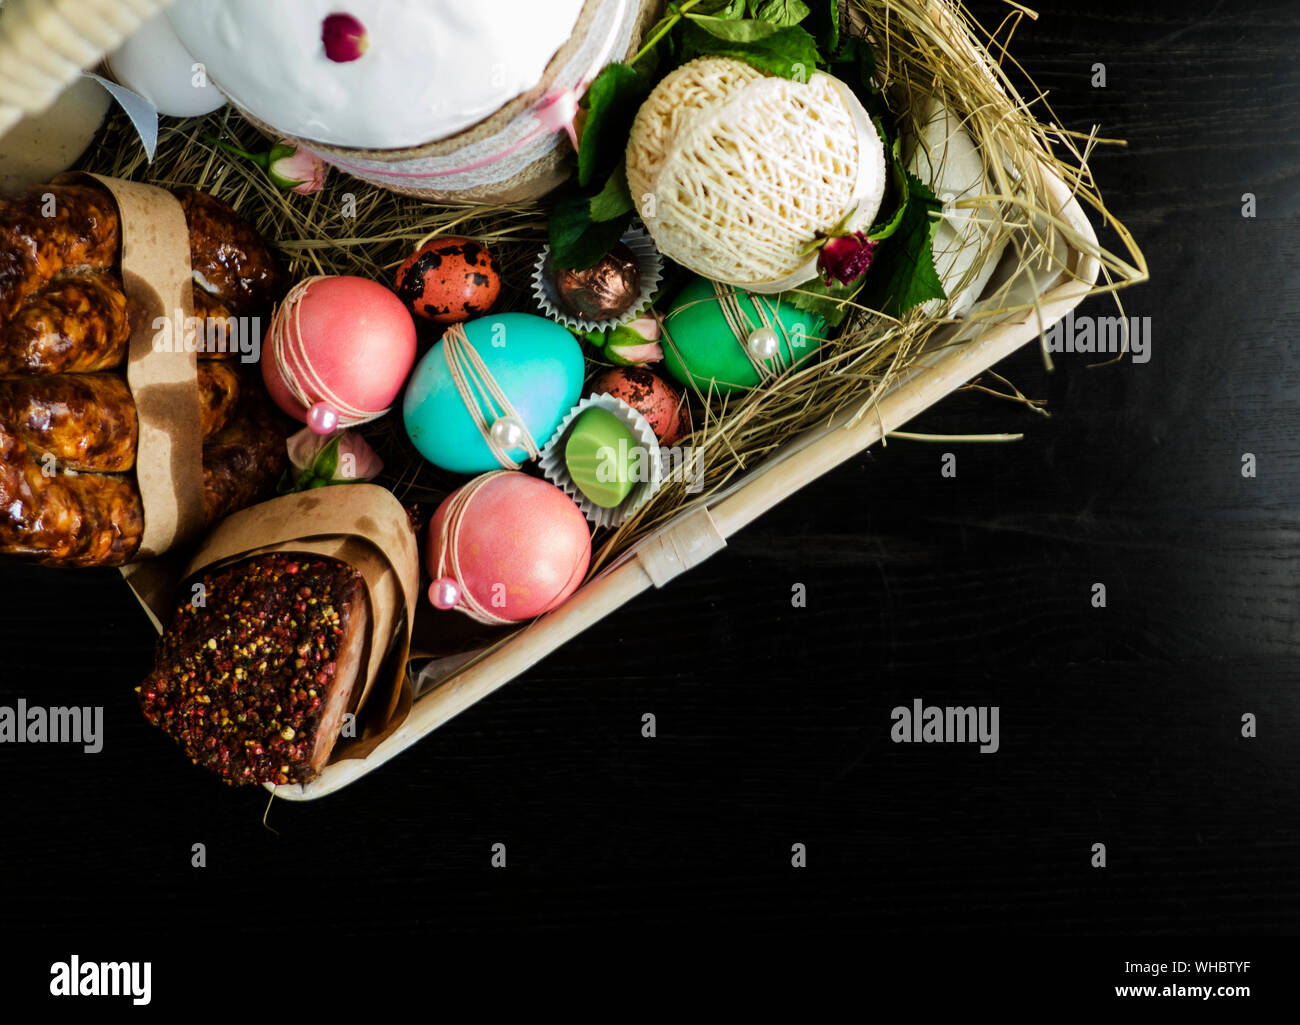 High Angle View Of Easter Basket On Table Stock Photo